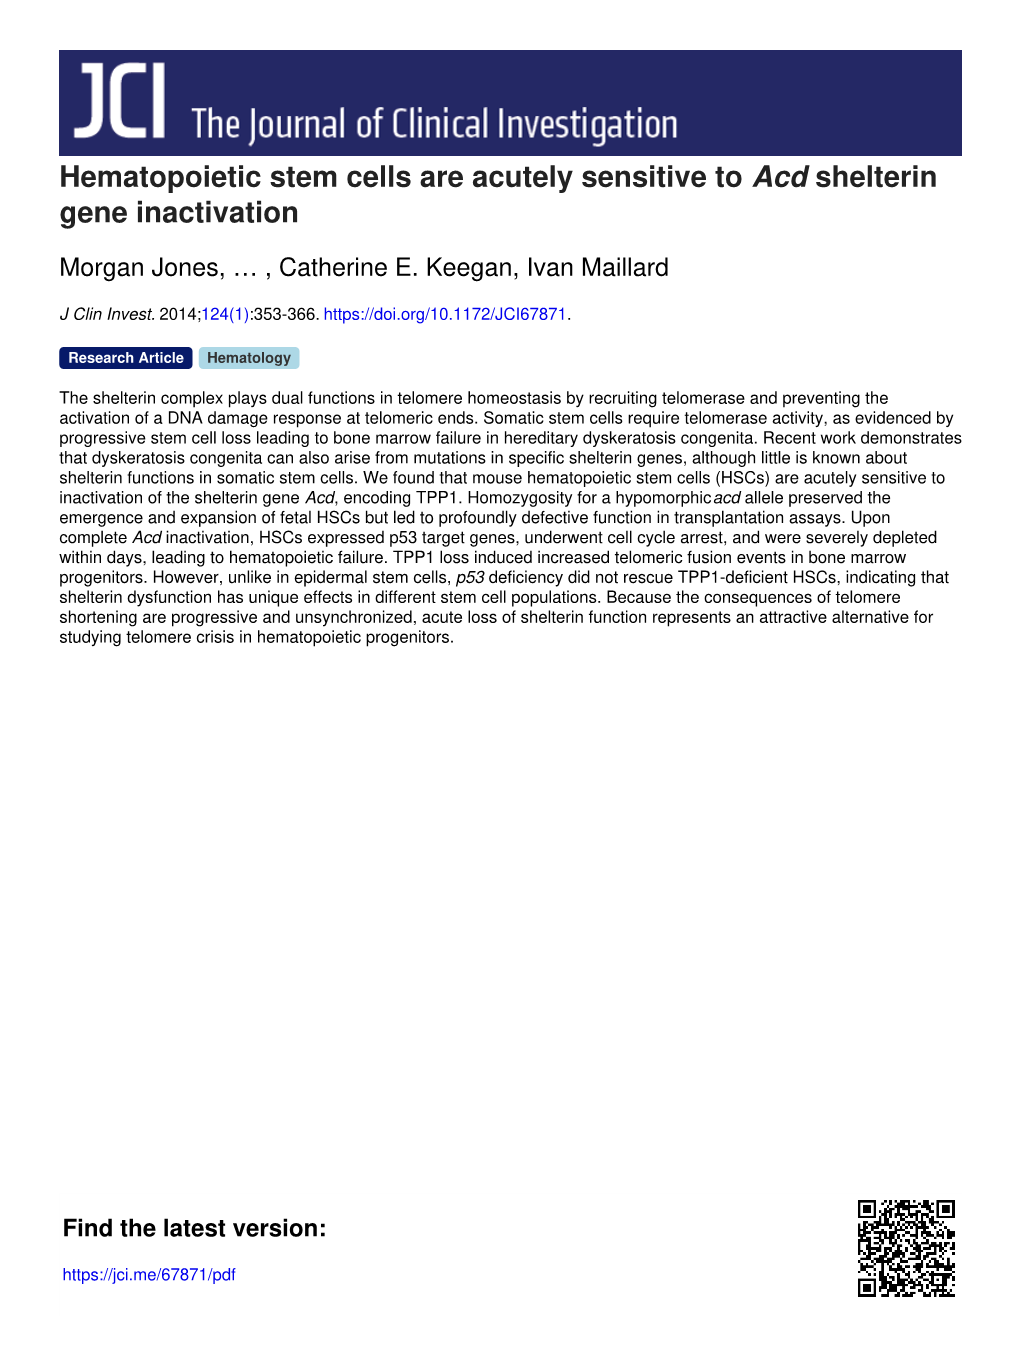 Hematopoietic Stem Cells Are Acutely Sensitive to Acd Shelterin Gene Inactivation